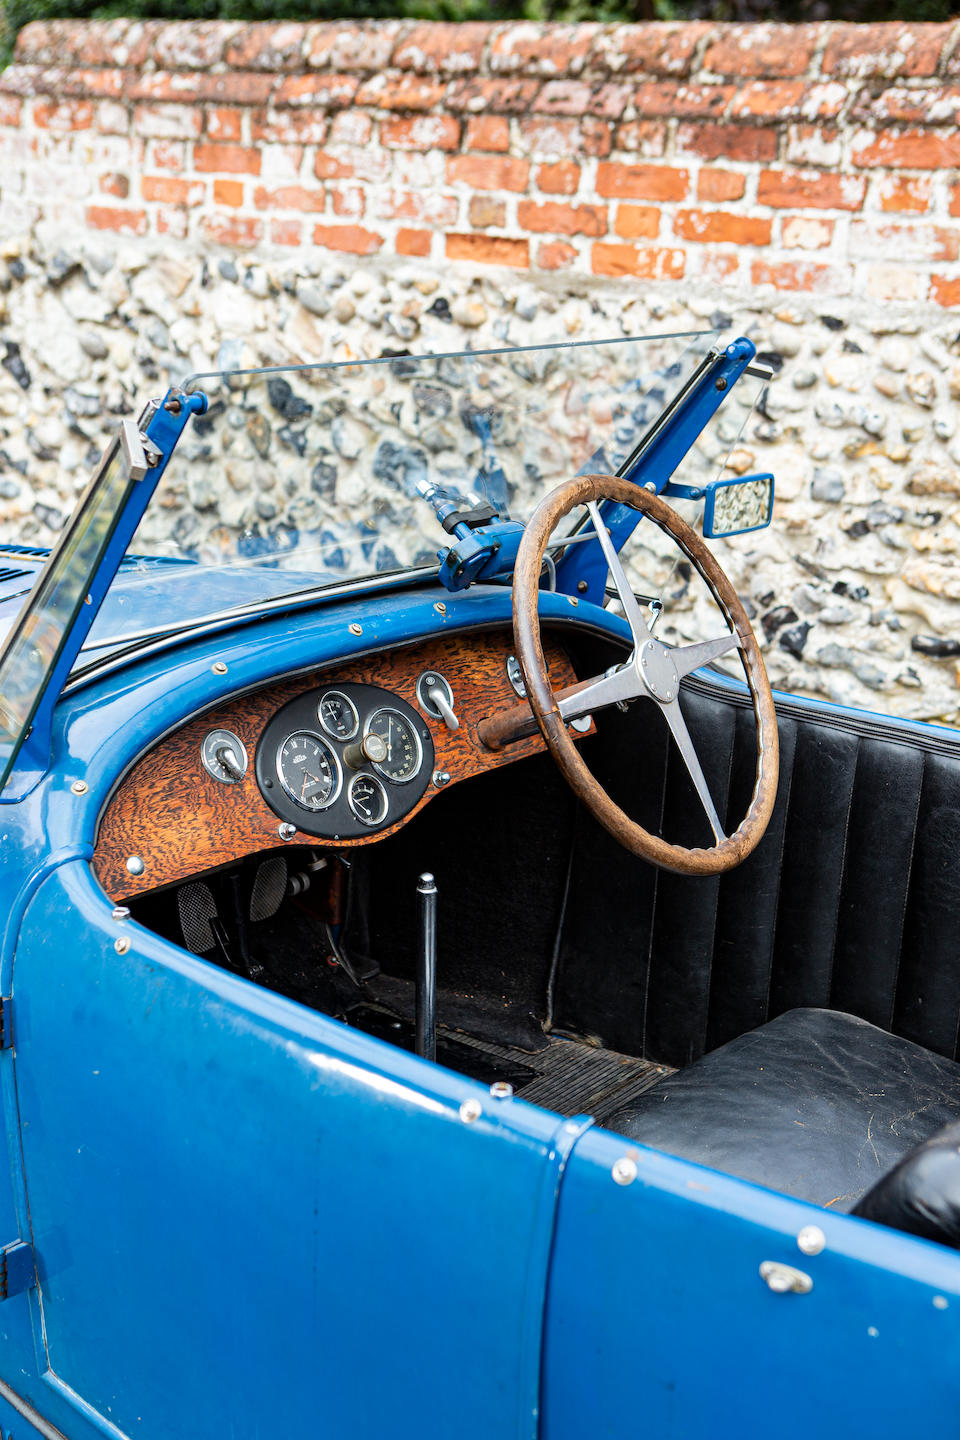 Property of the late Anthony Clark,1929 Bugatti Type 40 Grand Sport Tourer  Chassis no. 40764